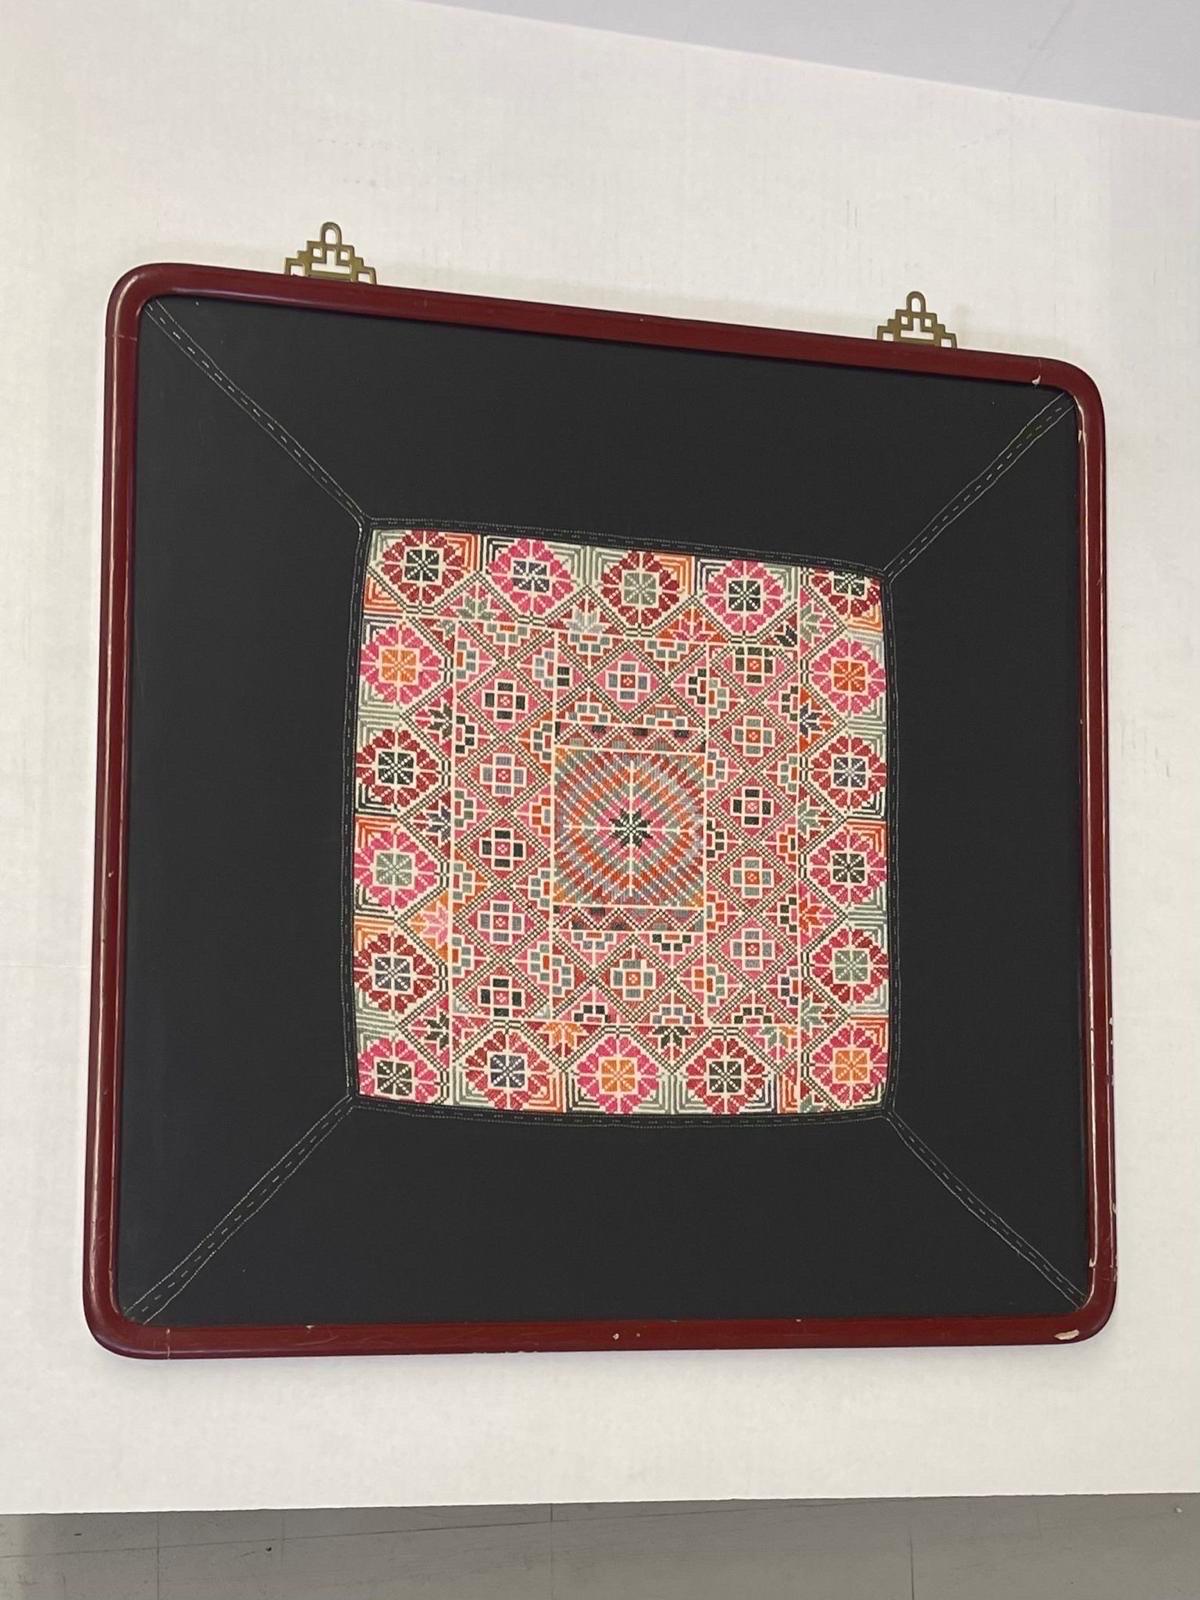 This Piece features two brass toned hinge hooks coming from the top of the frame. Maroon colored frame. Embroidered Textile may be of Chinese origin based on Research. The Textile is stitched on to a black fabric acting as the border. Vintage